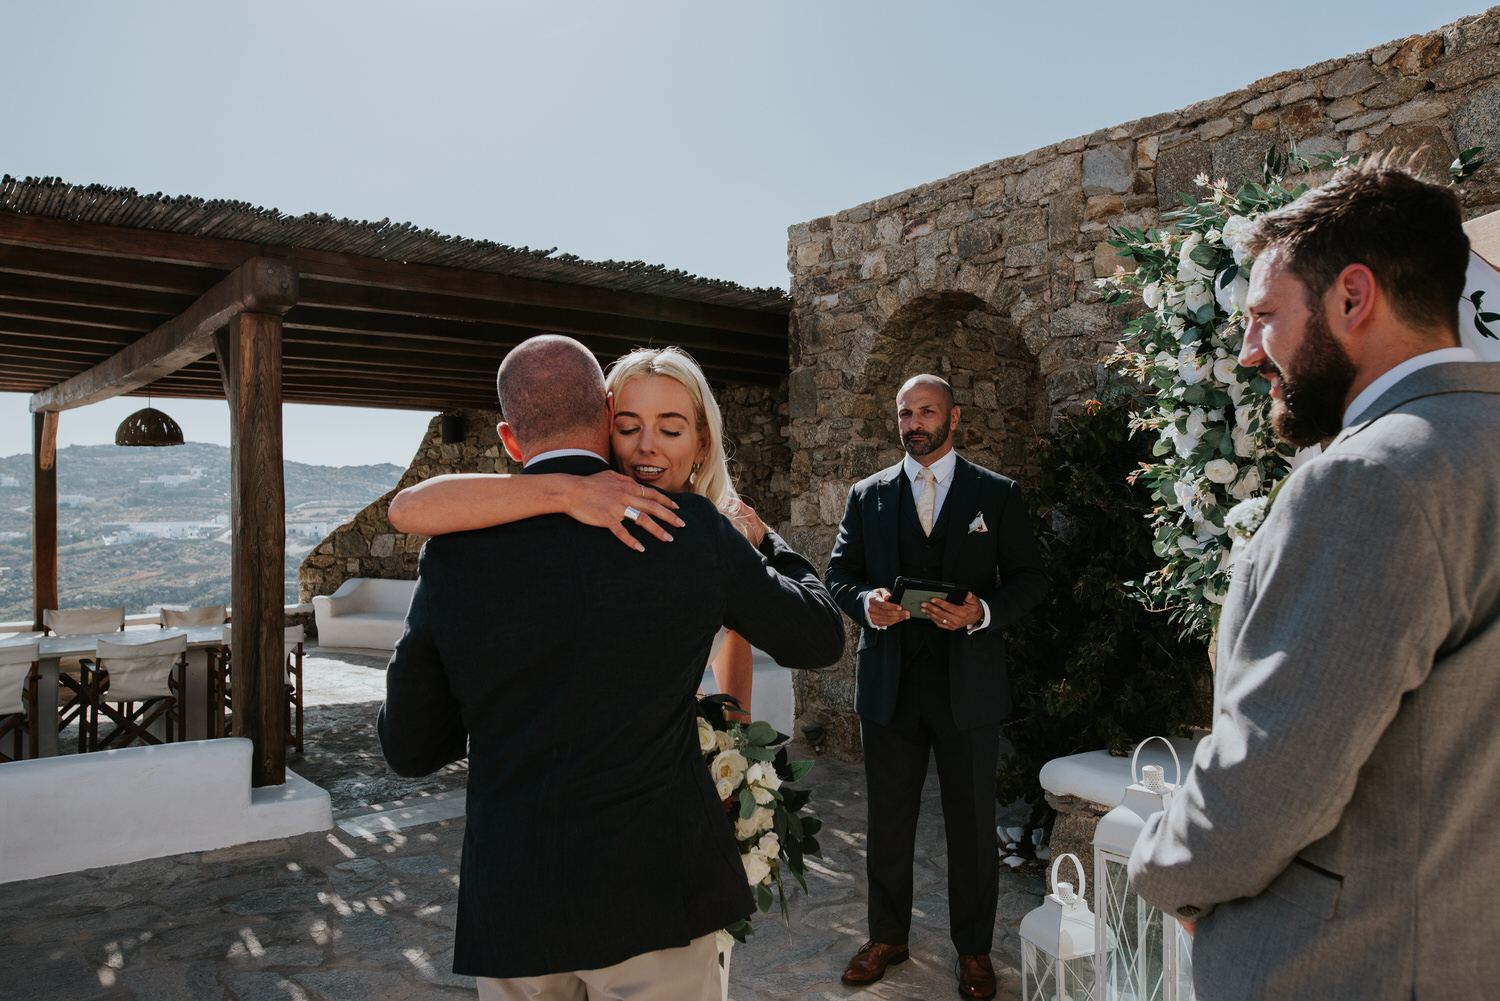 Mykonos wedding photographer: bride hugging as she comes up the aisle with groom and celebrant around.